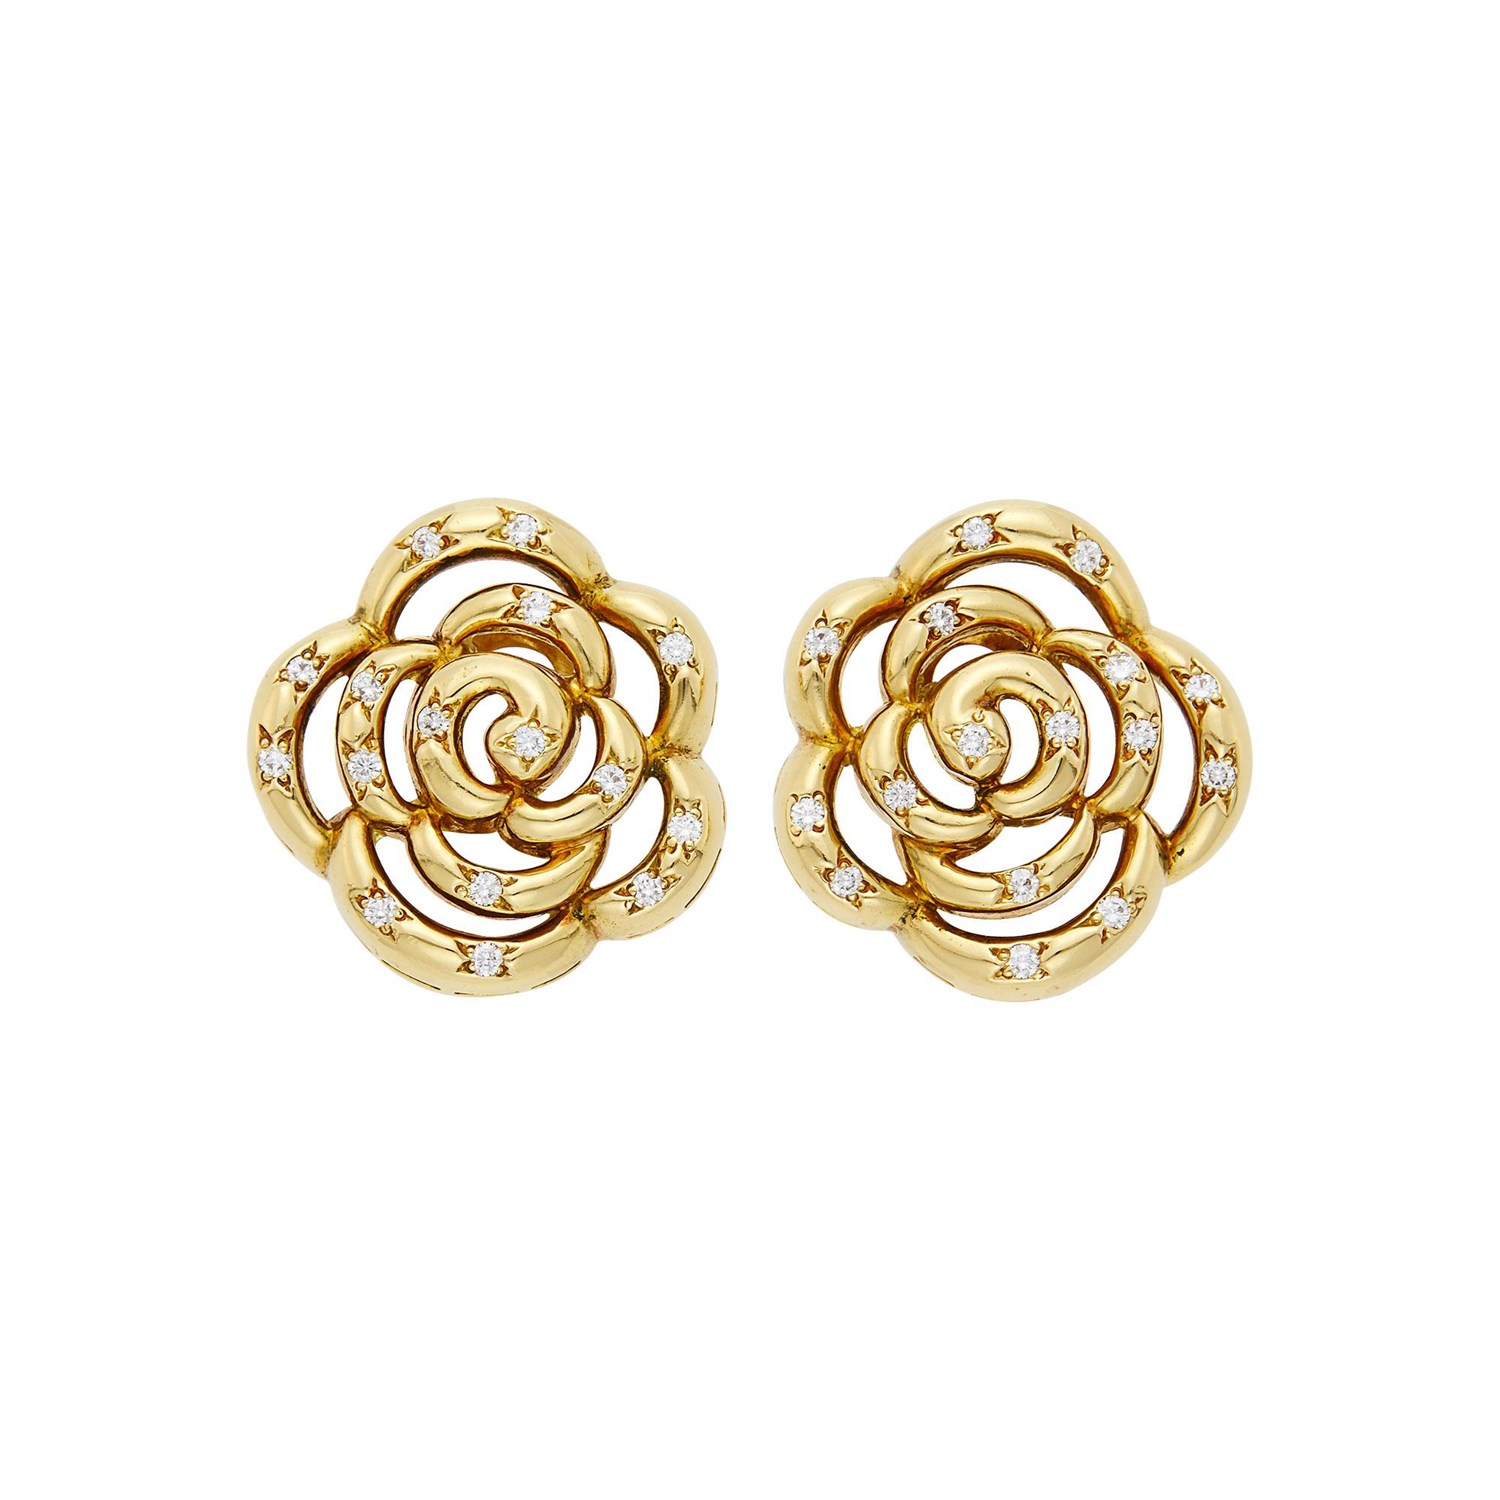 Lot 18 - Van Cleef & Arpels Pair of Gold and Diamond 'Camellia' Earclips